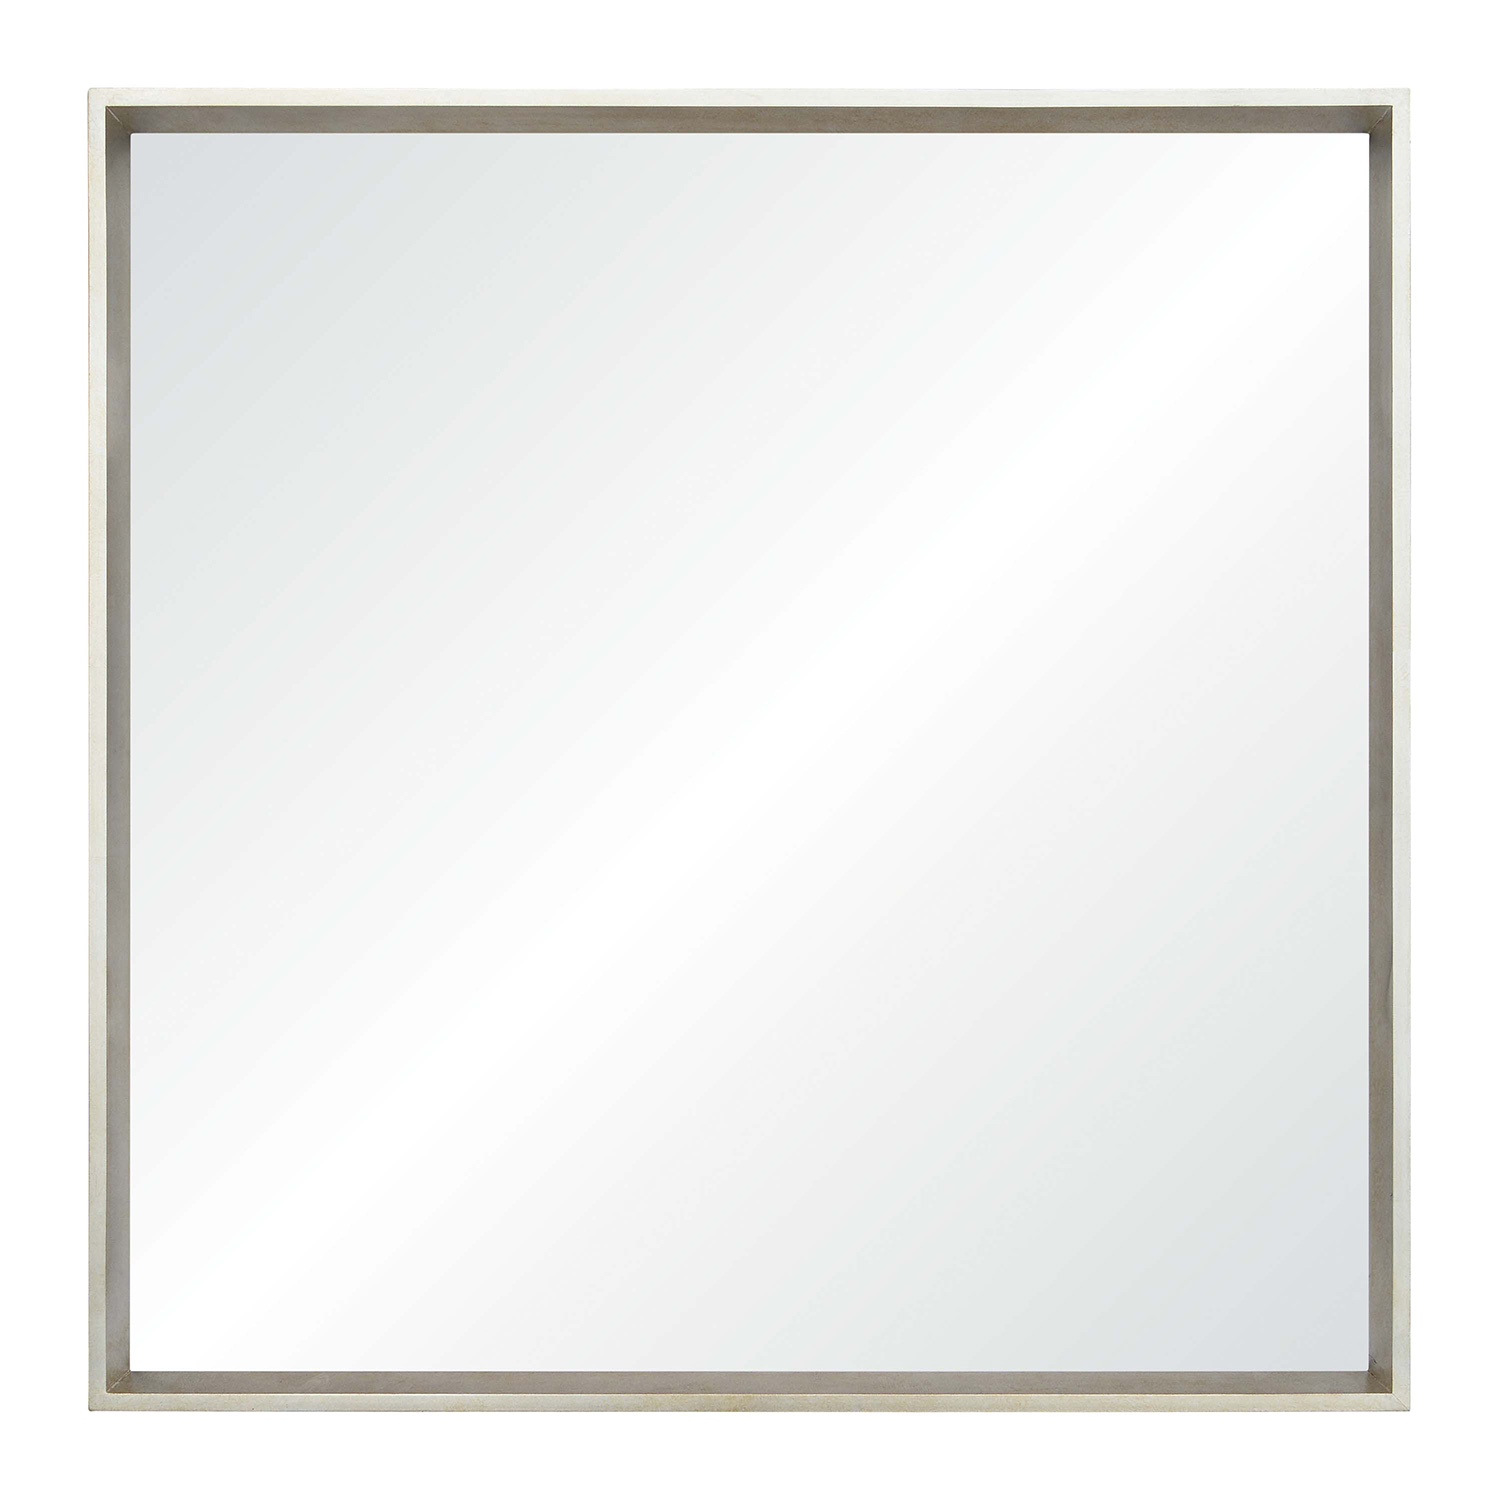 Ren-Wil Clearview Square Mirror - Champagne Silver Leaf